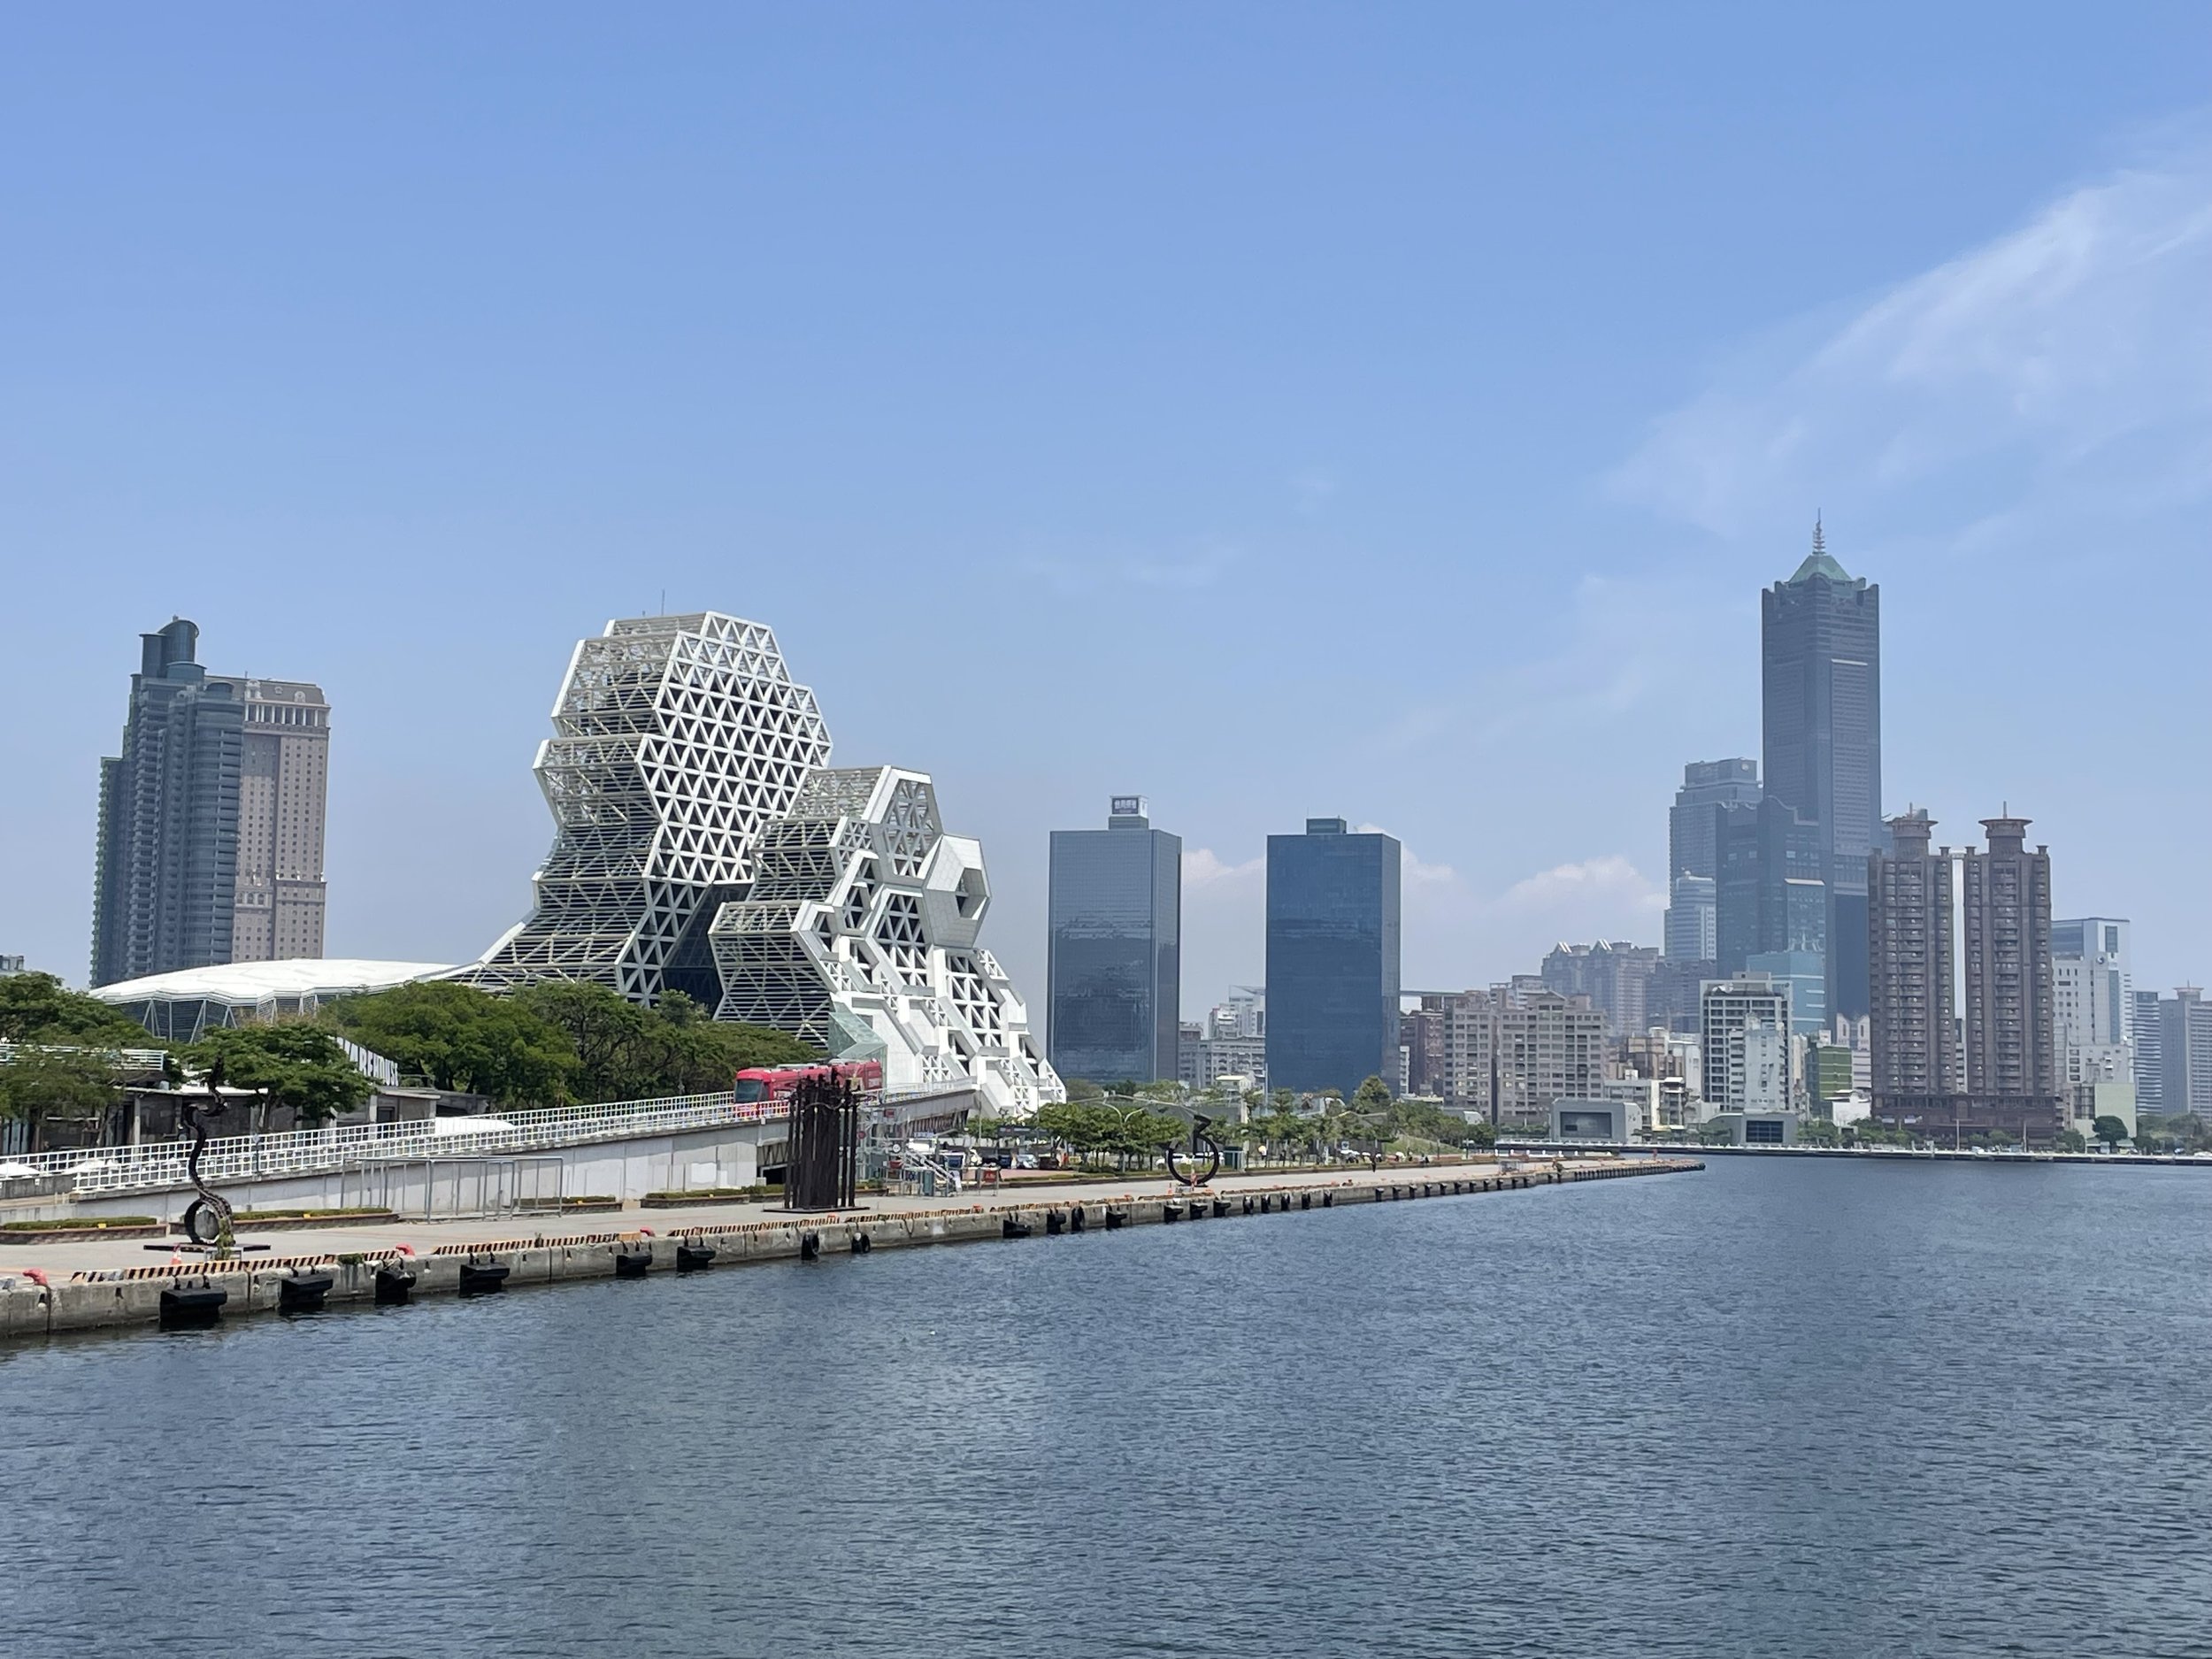 View to Kaohsiung Music Center, Love Pier